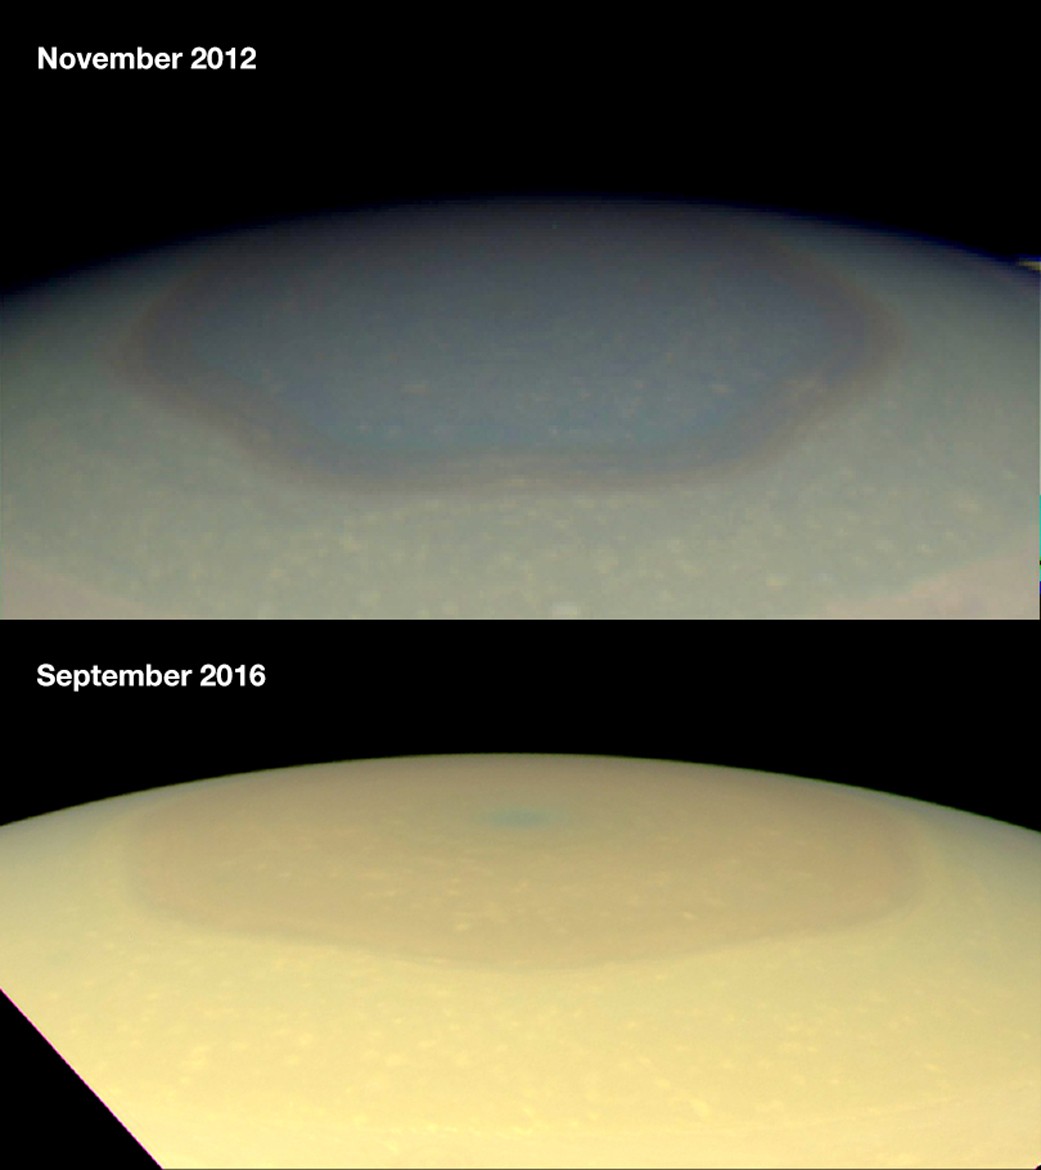 Astronomers Investigate Color Changes in Saturn’s Atmospheric Hexagon